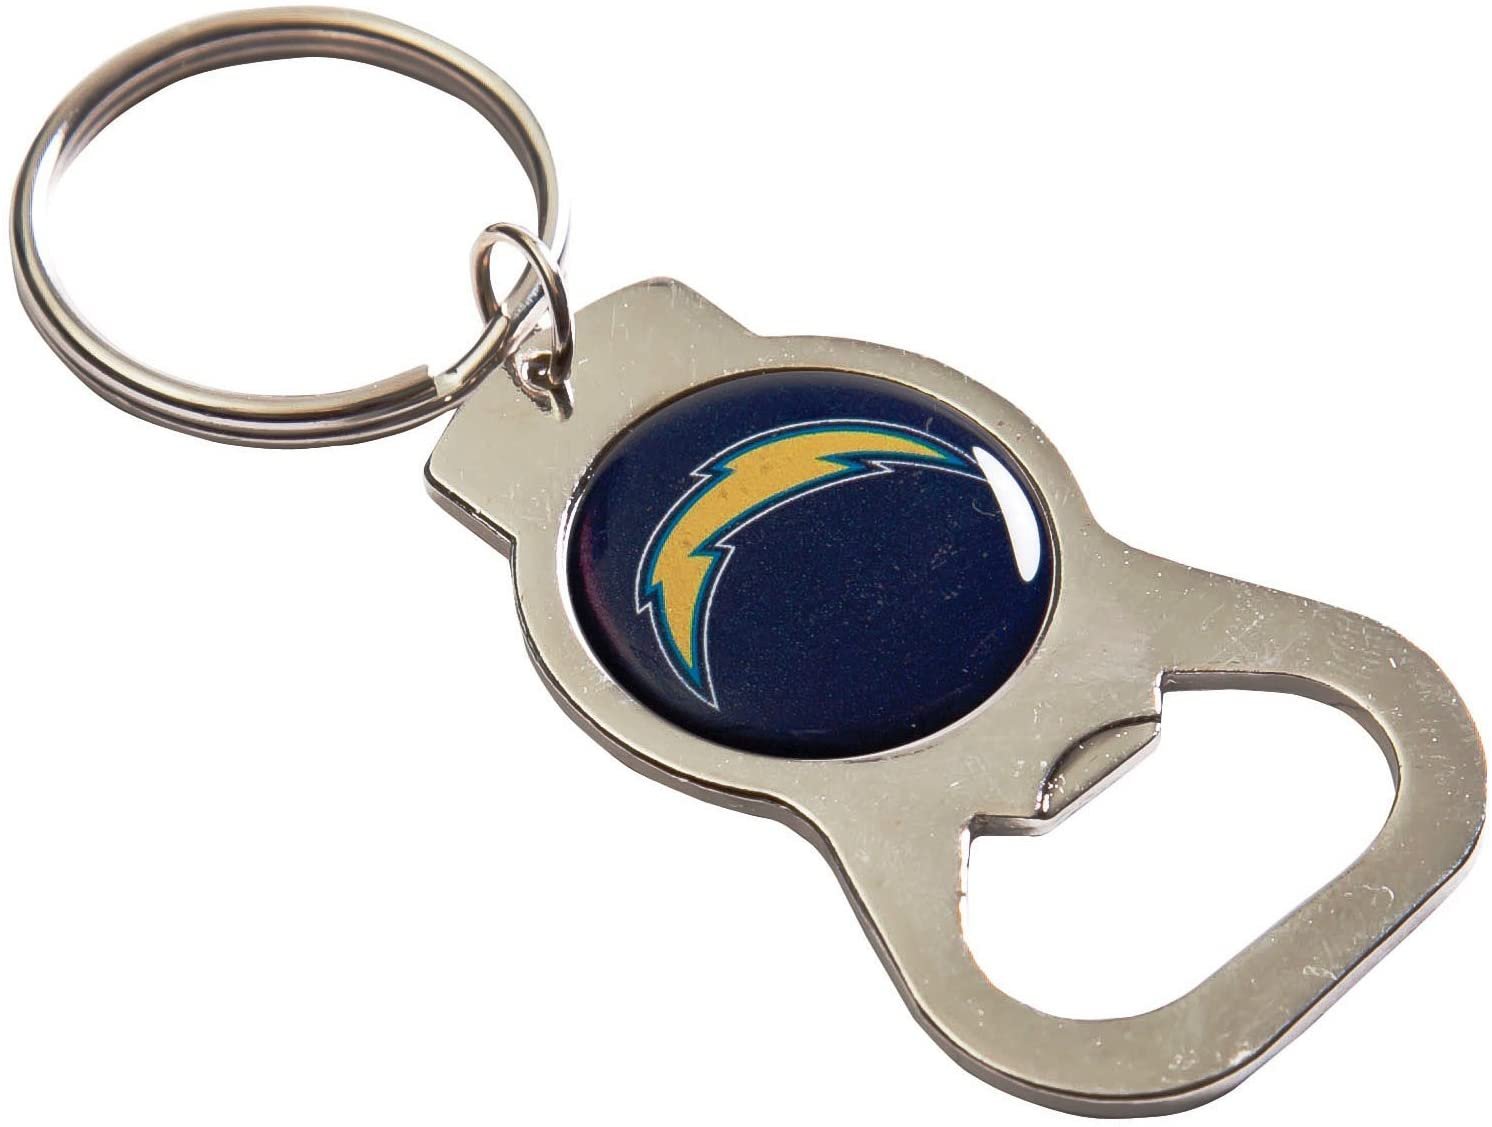 Los Angeles Chargers Premium Solid Metal Bottle Opener Keychain, Silver Key Ring, Team Logo